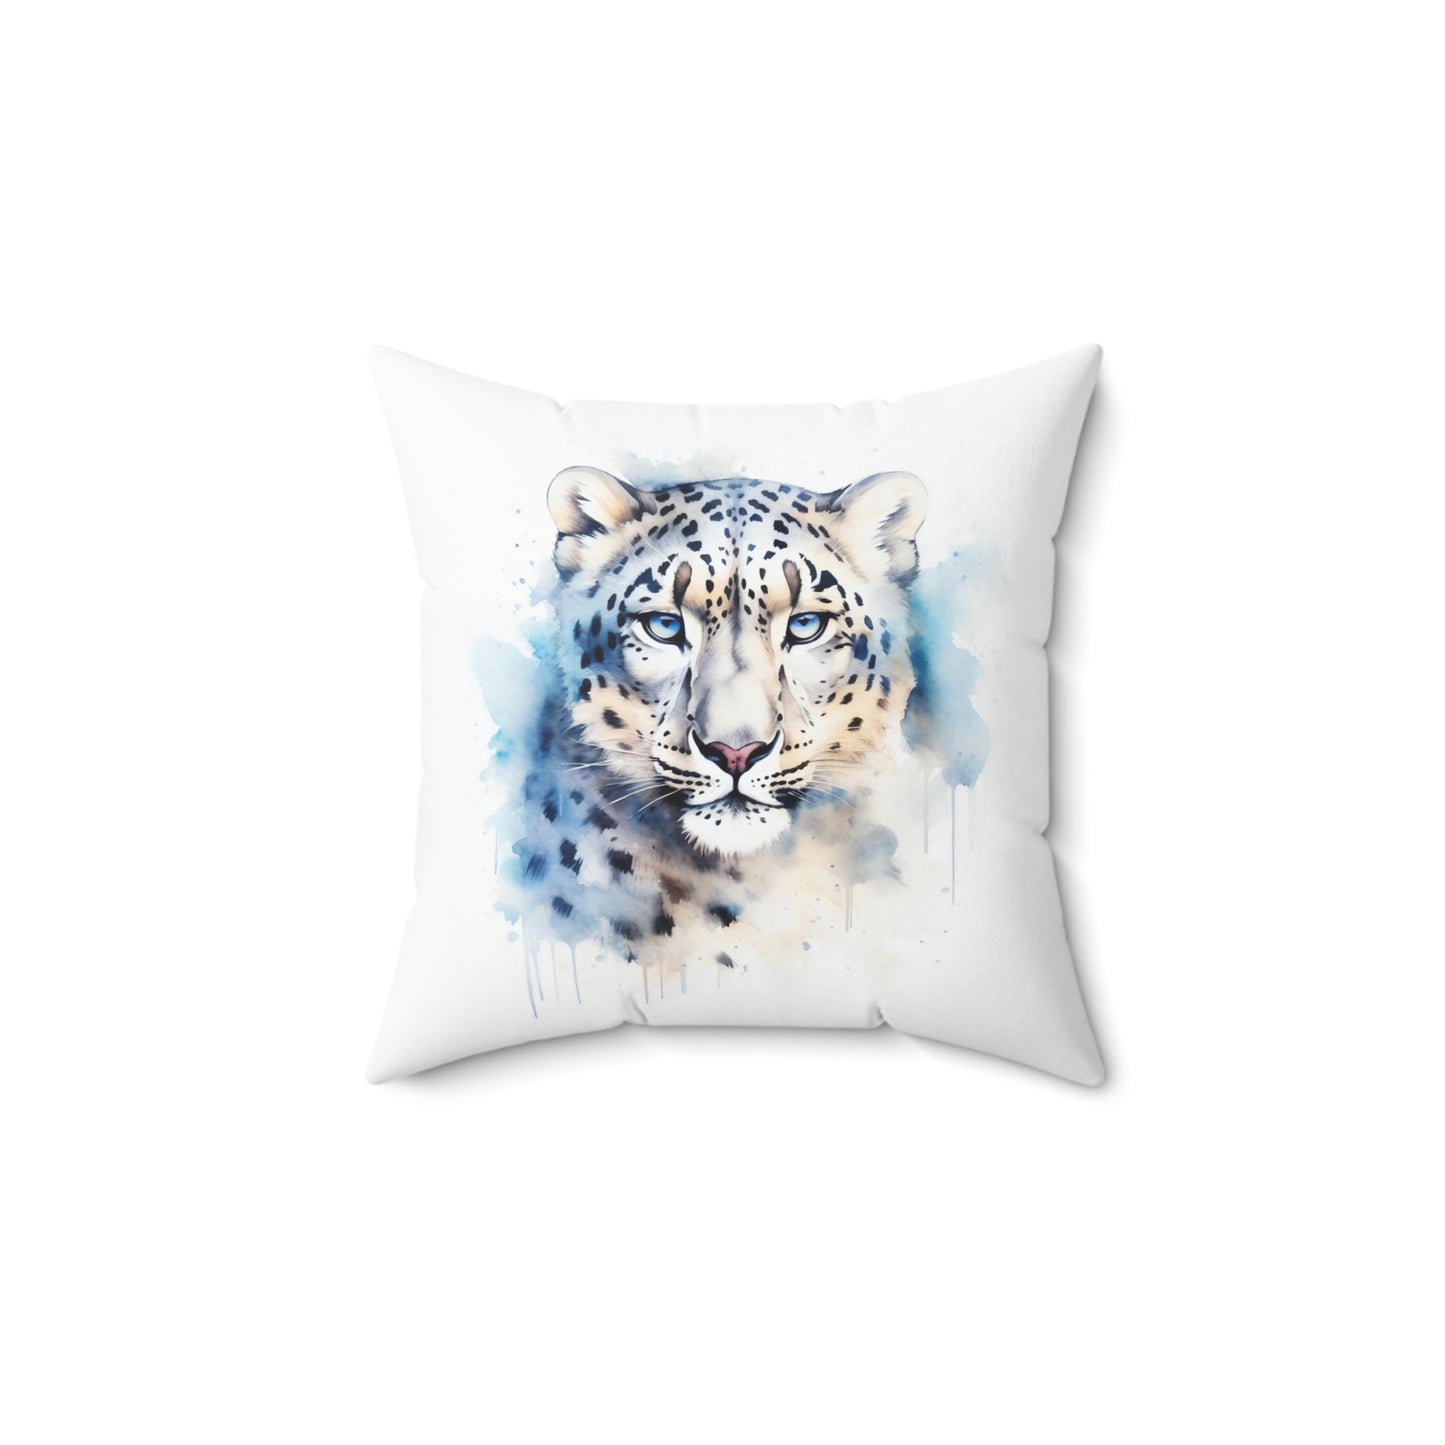 Snow Leopard Throw Pillow, Watercolor Snow Leopard Decorative Pillow, Square Animal Cushion, Double Sided Accent Pillow, Concealed Zipper